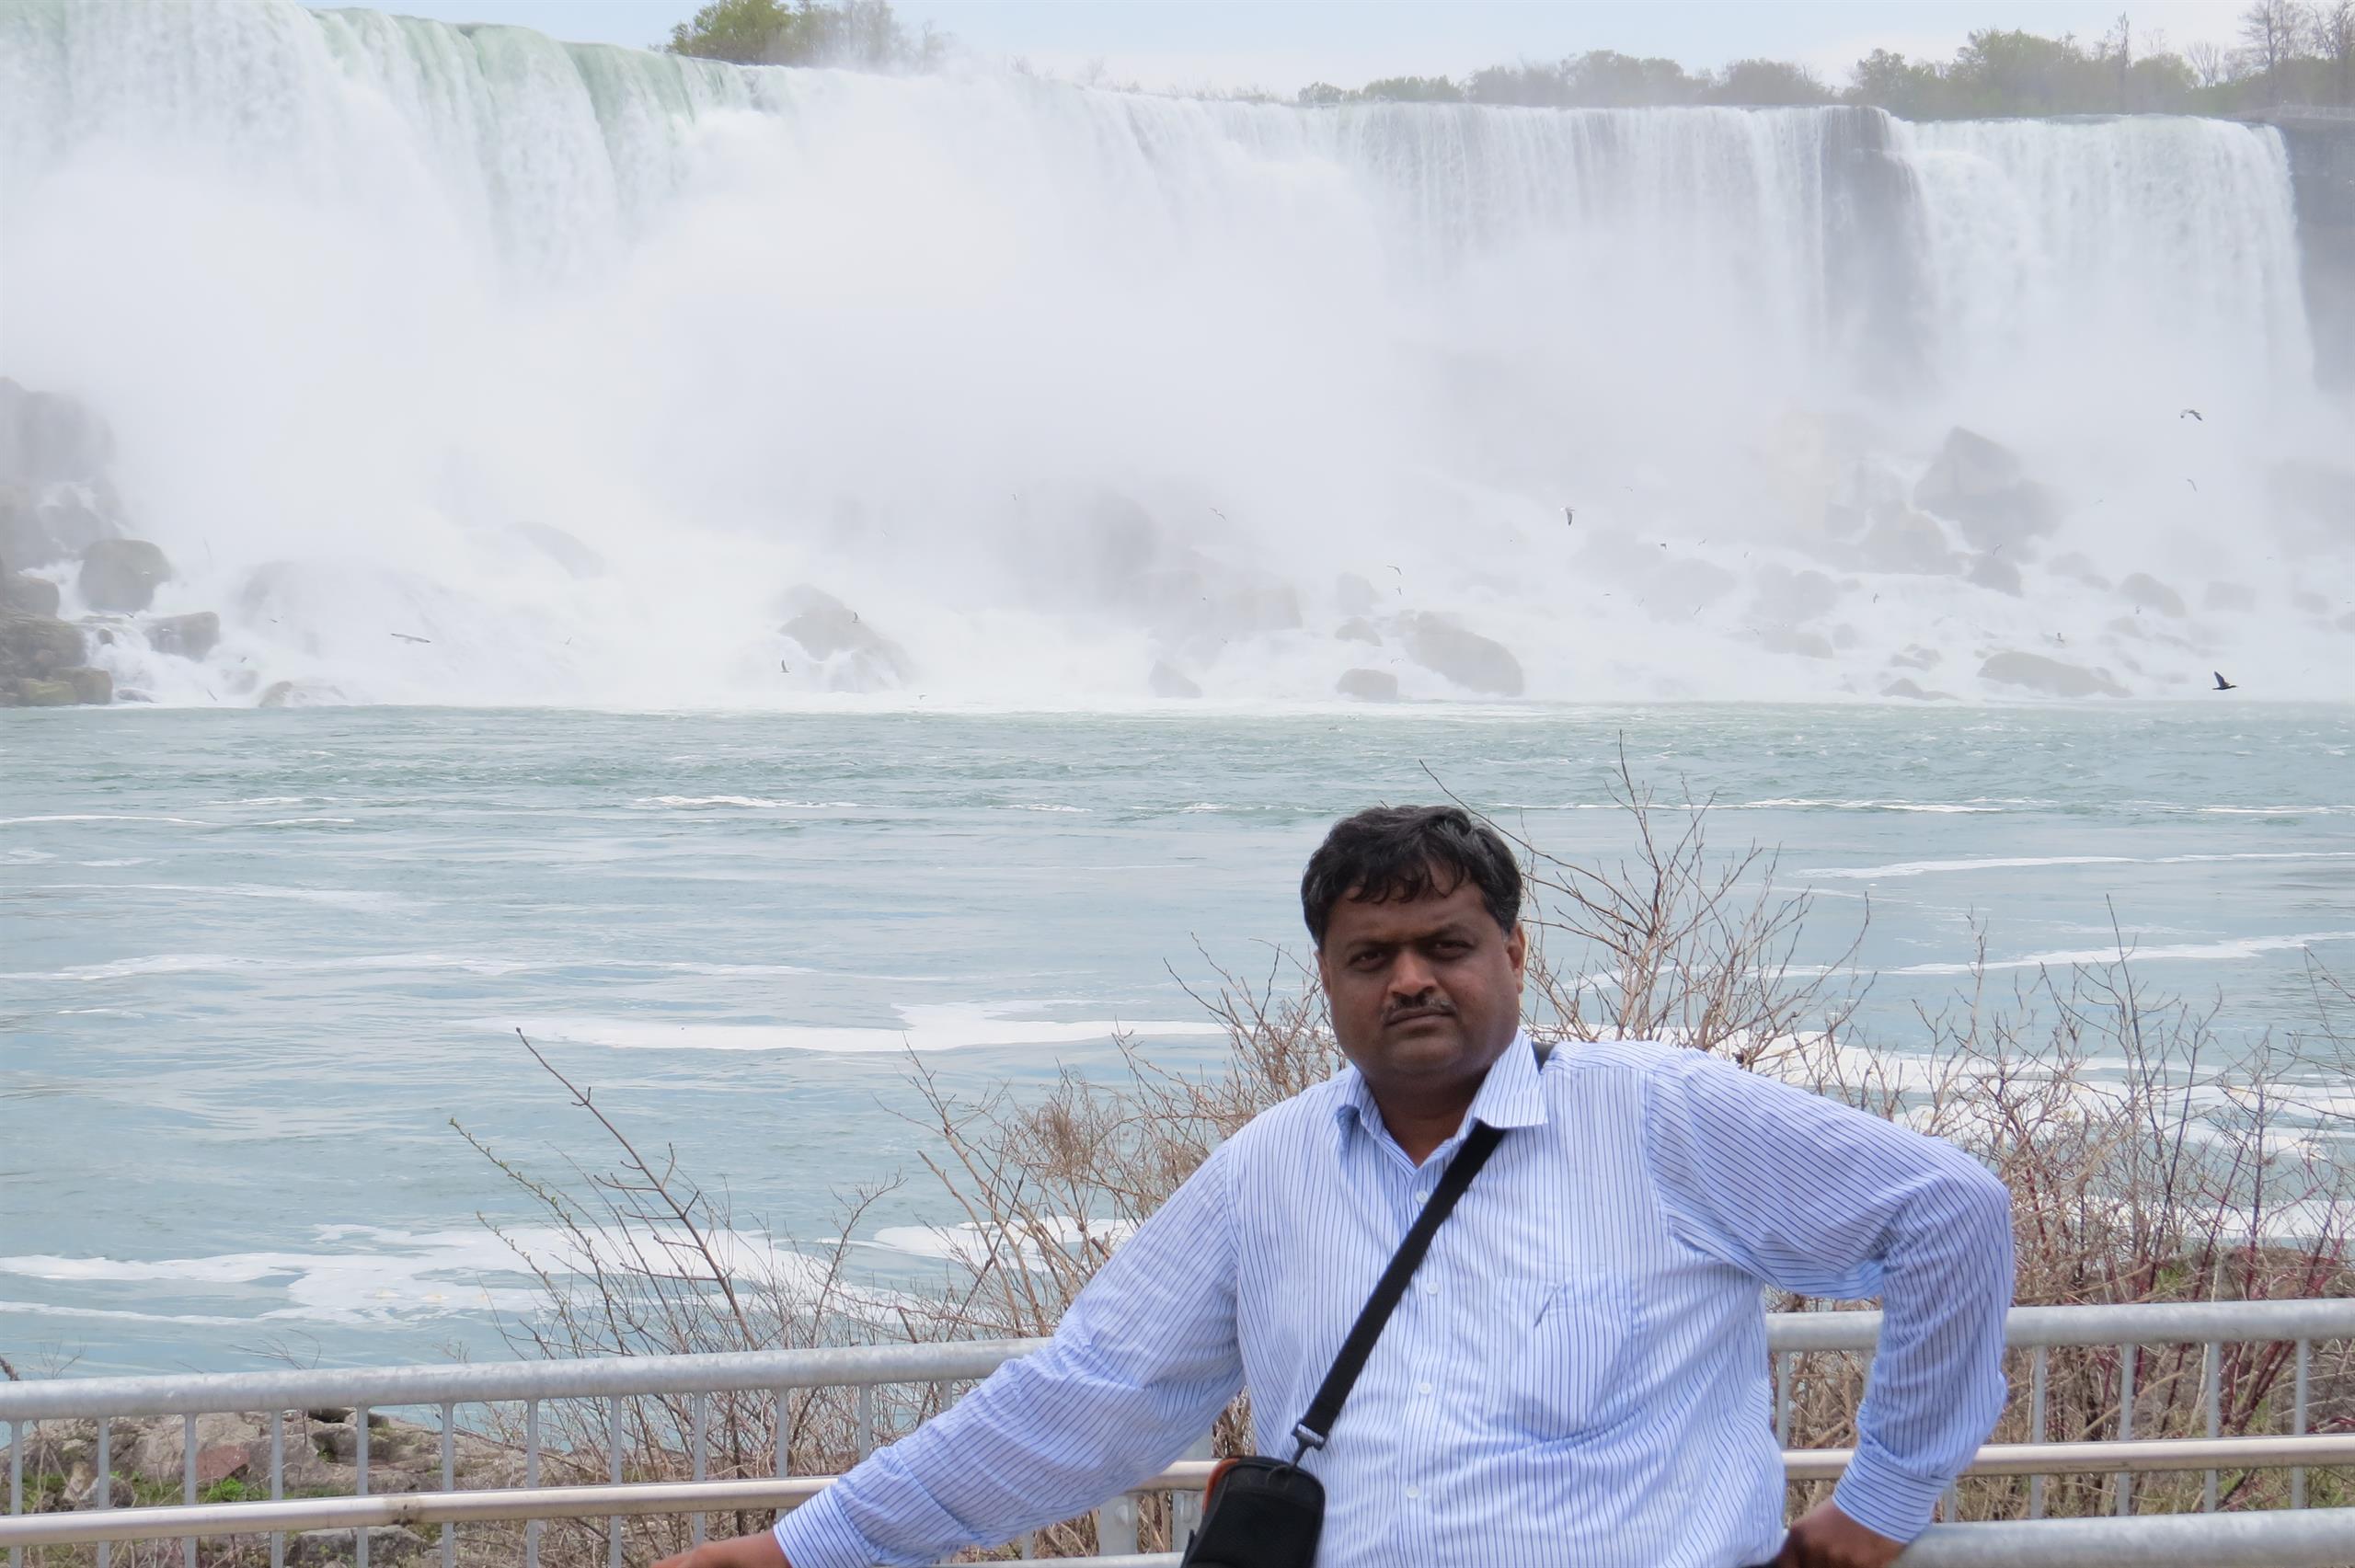 Arpan visited Niagara Falls, which straddles the international border between the United States and Canada. 